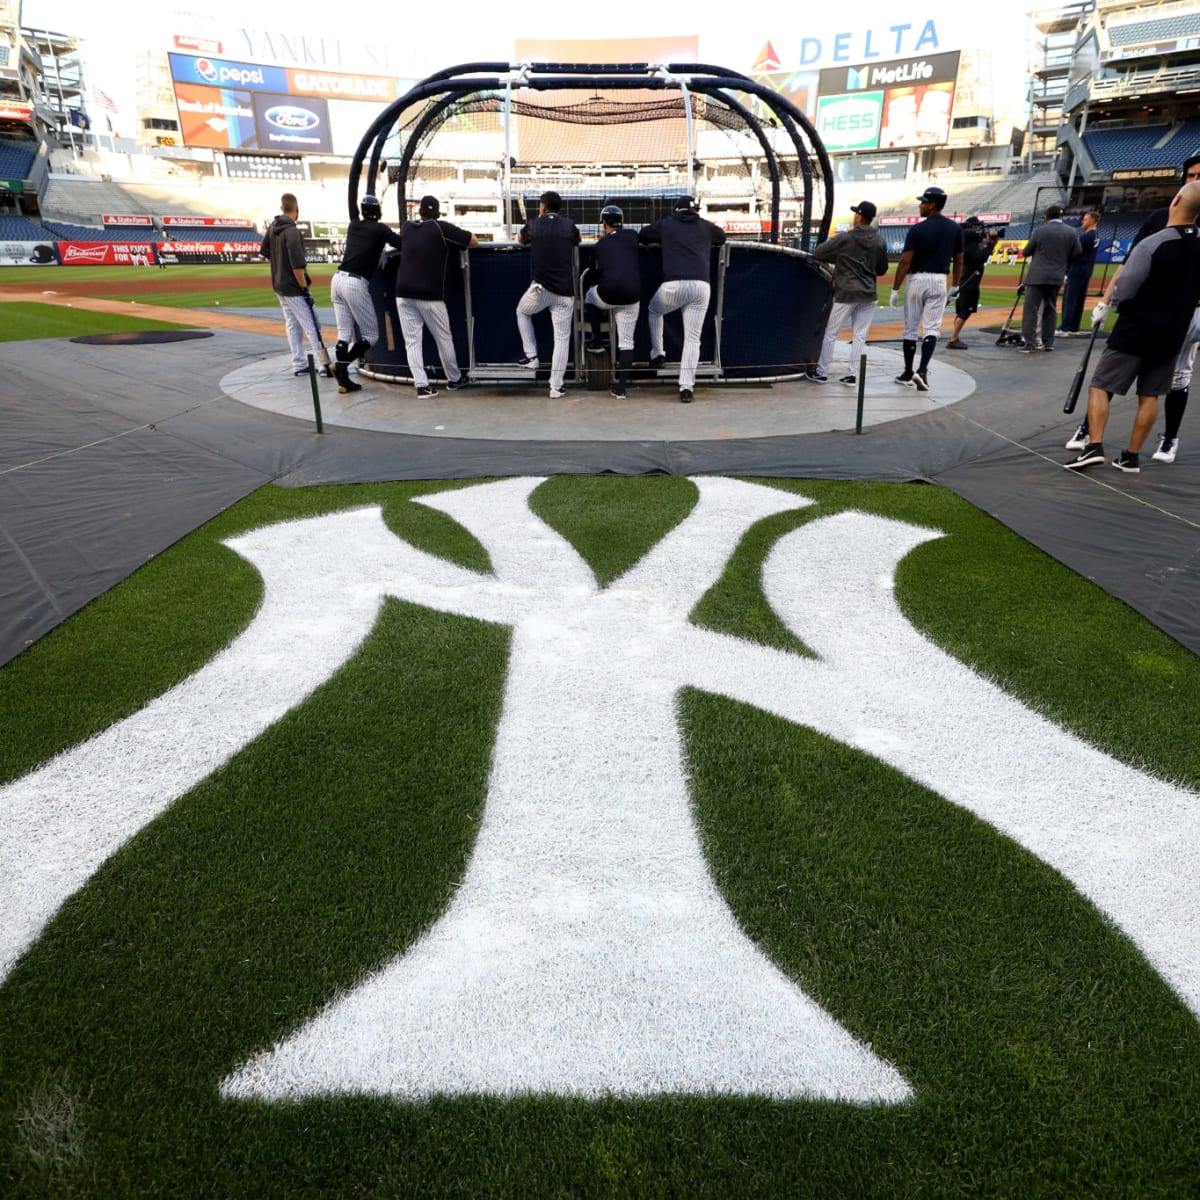 Report Tonights Yankees Game Is Now Up In The Air